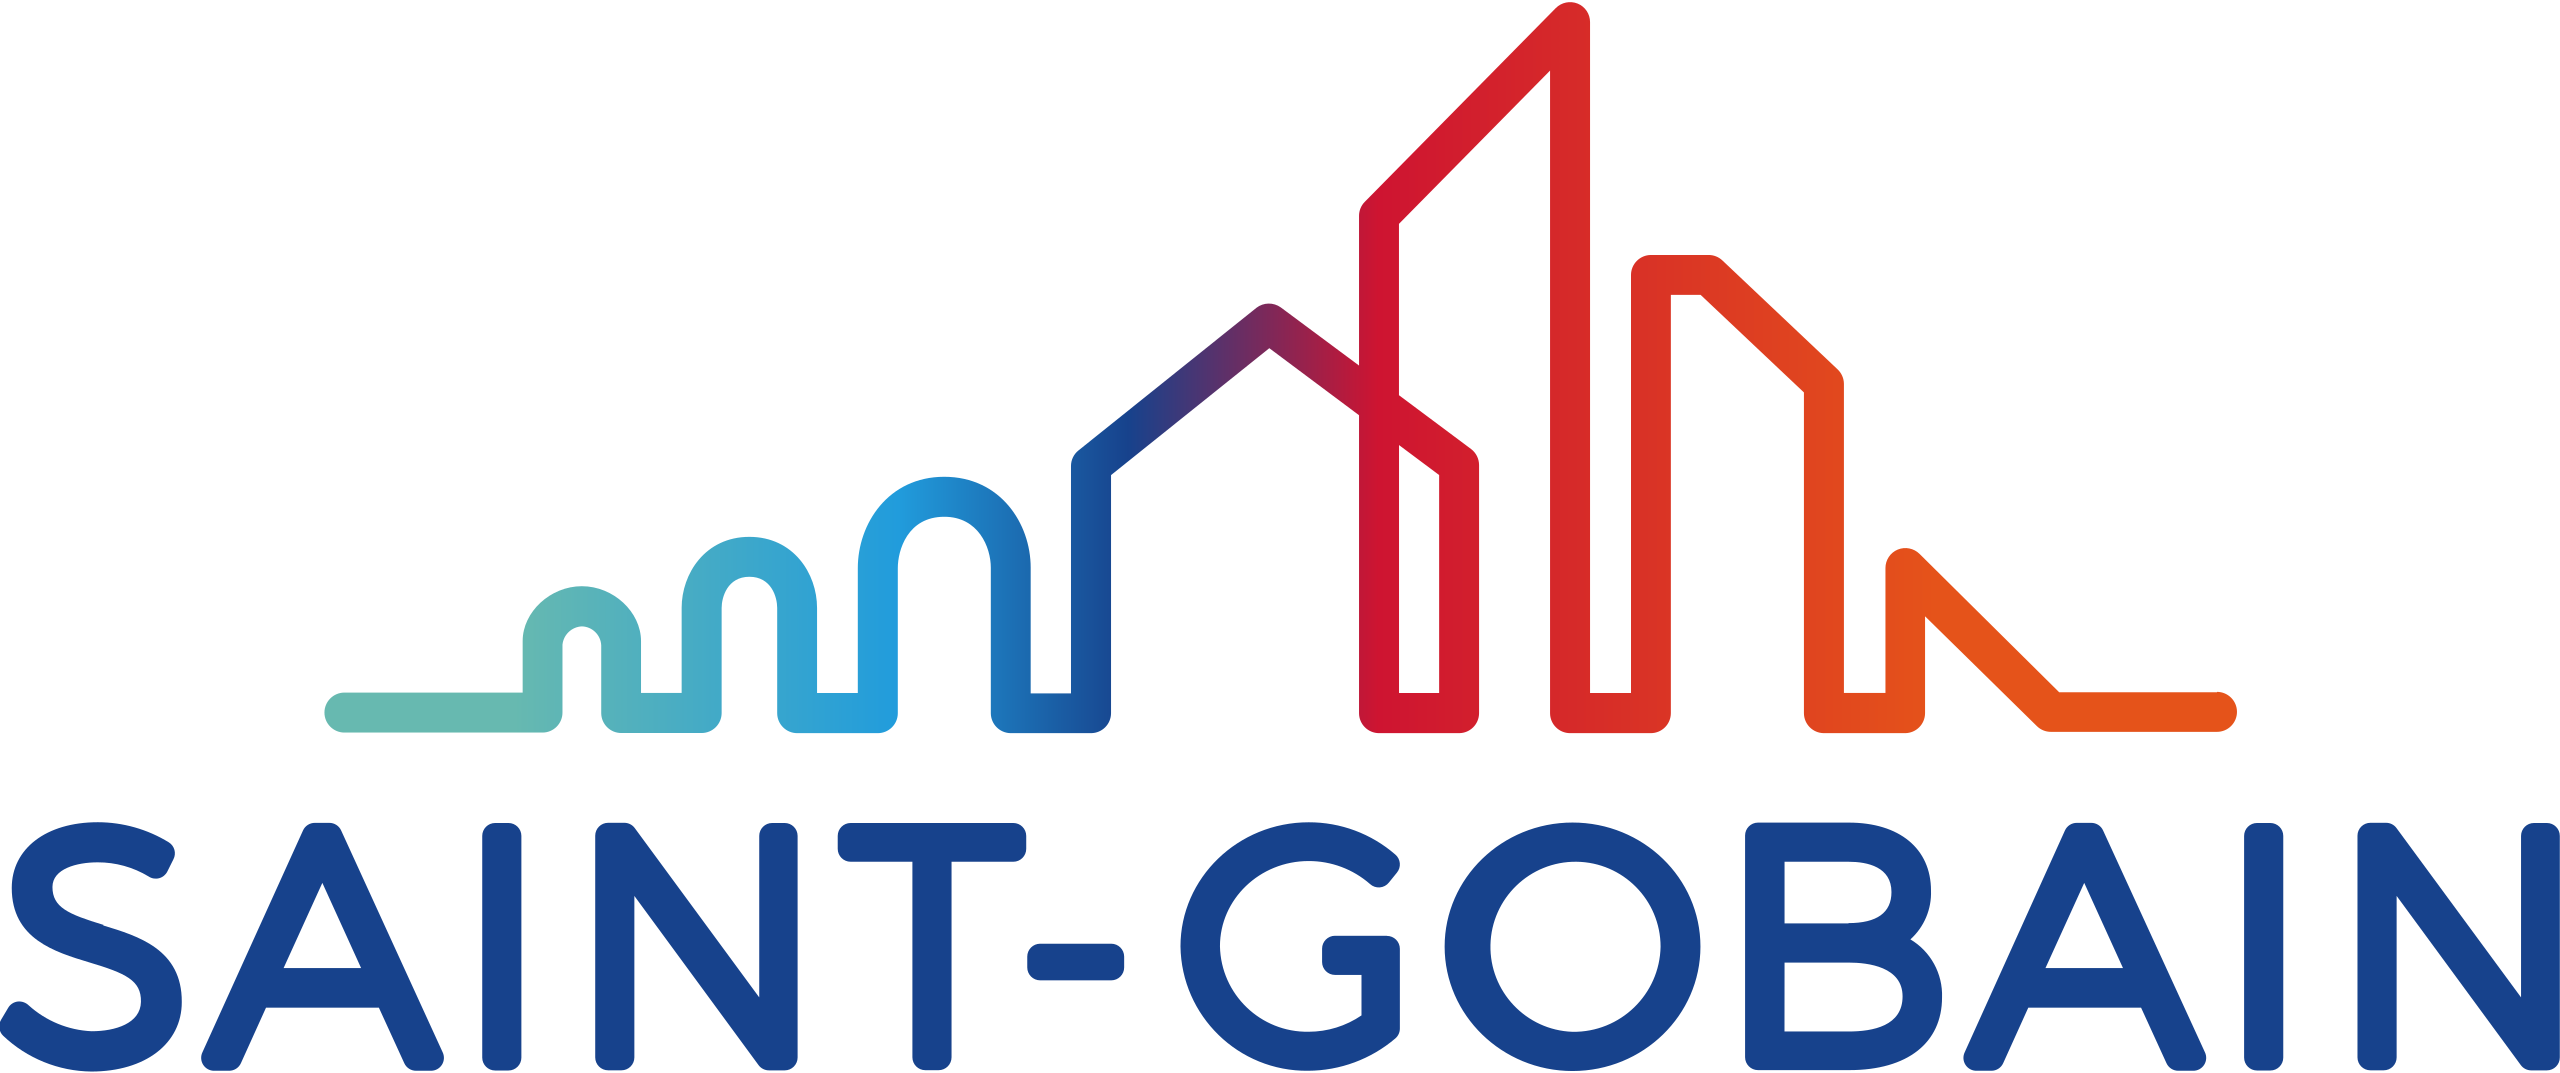 Logo redirect to the page of Saint-Gobain